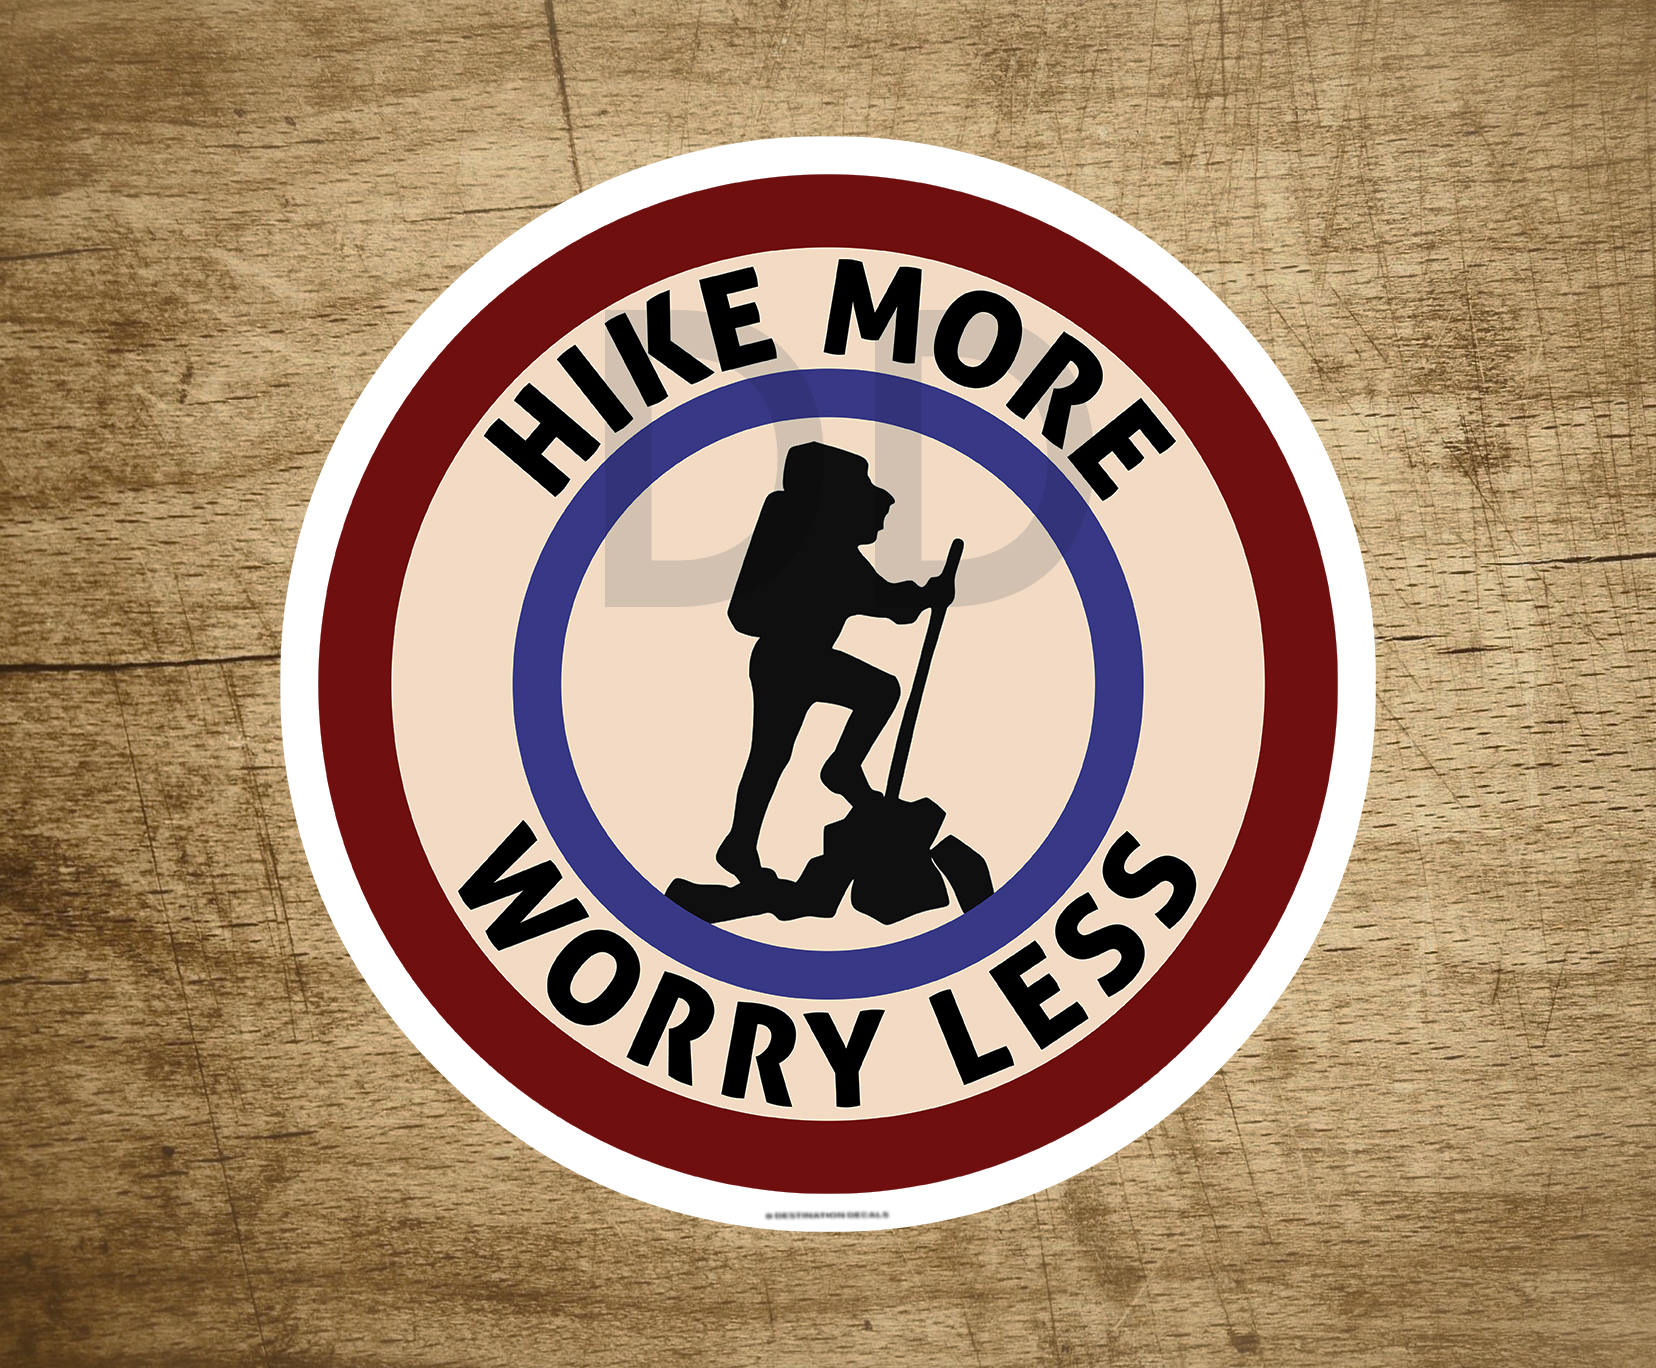 Hike More Worry Less Decal Sticker 3" x 3" Hiking National Park Forest